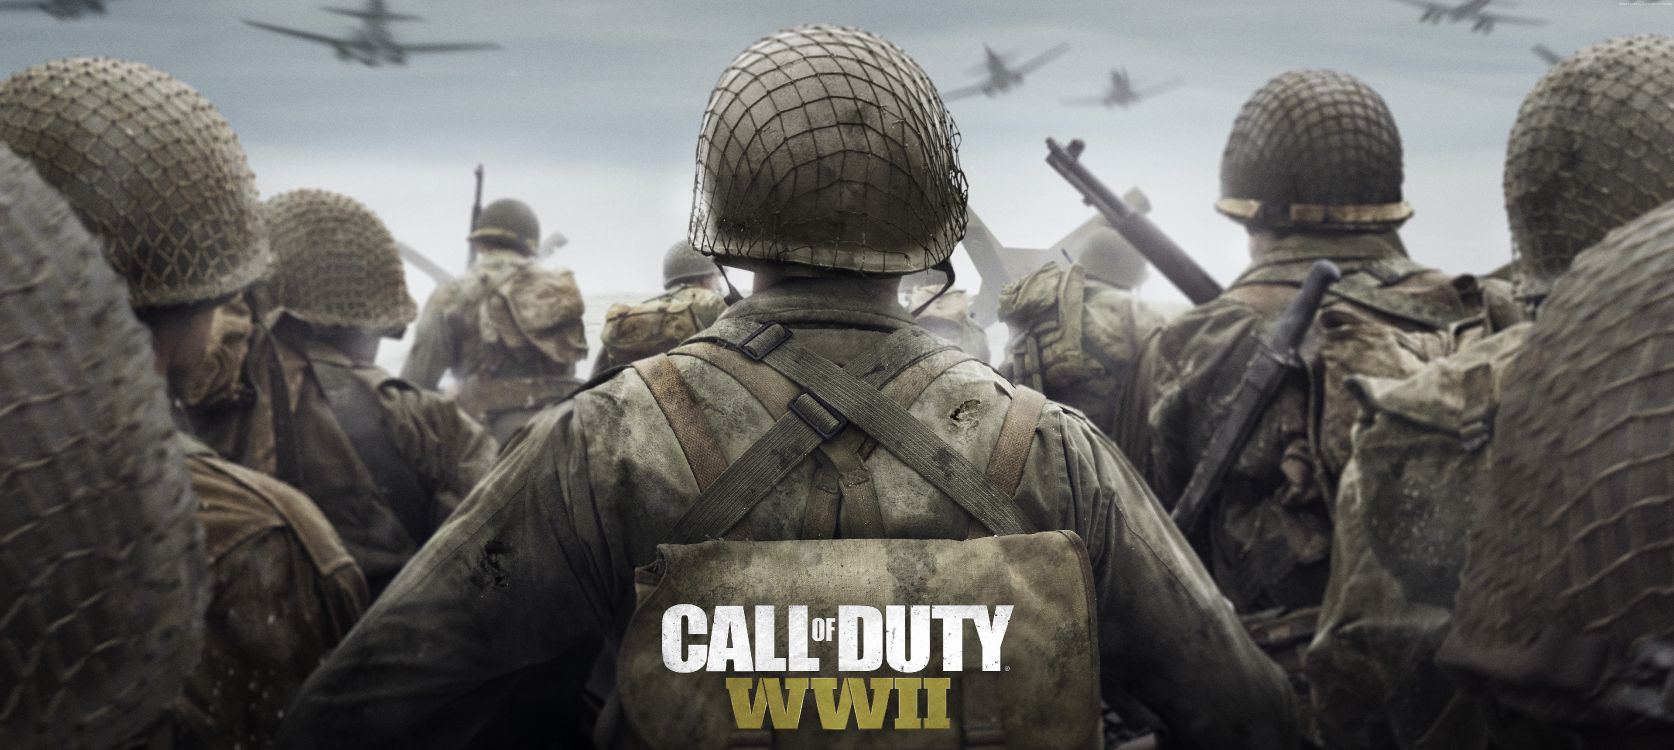 Call of Duty Ww2, Call of Duty WWII, Activision, Sledgehammer Games, Soldier. Wallpaper in 7190x3220 Resolution